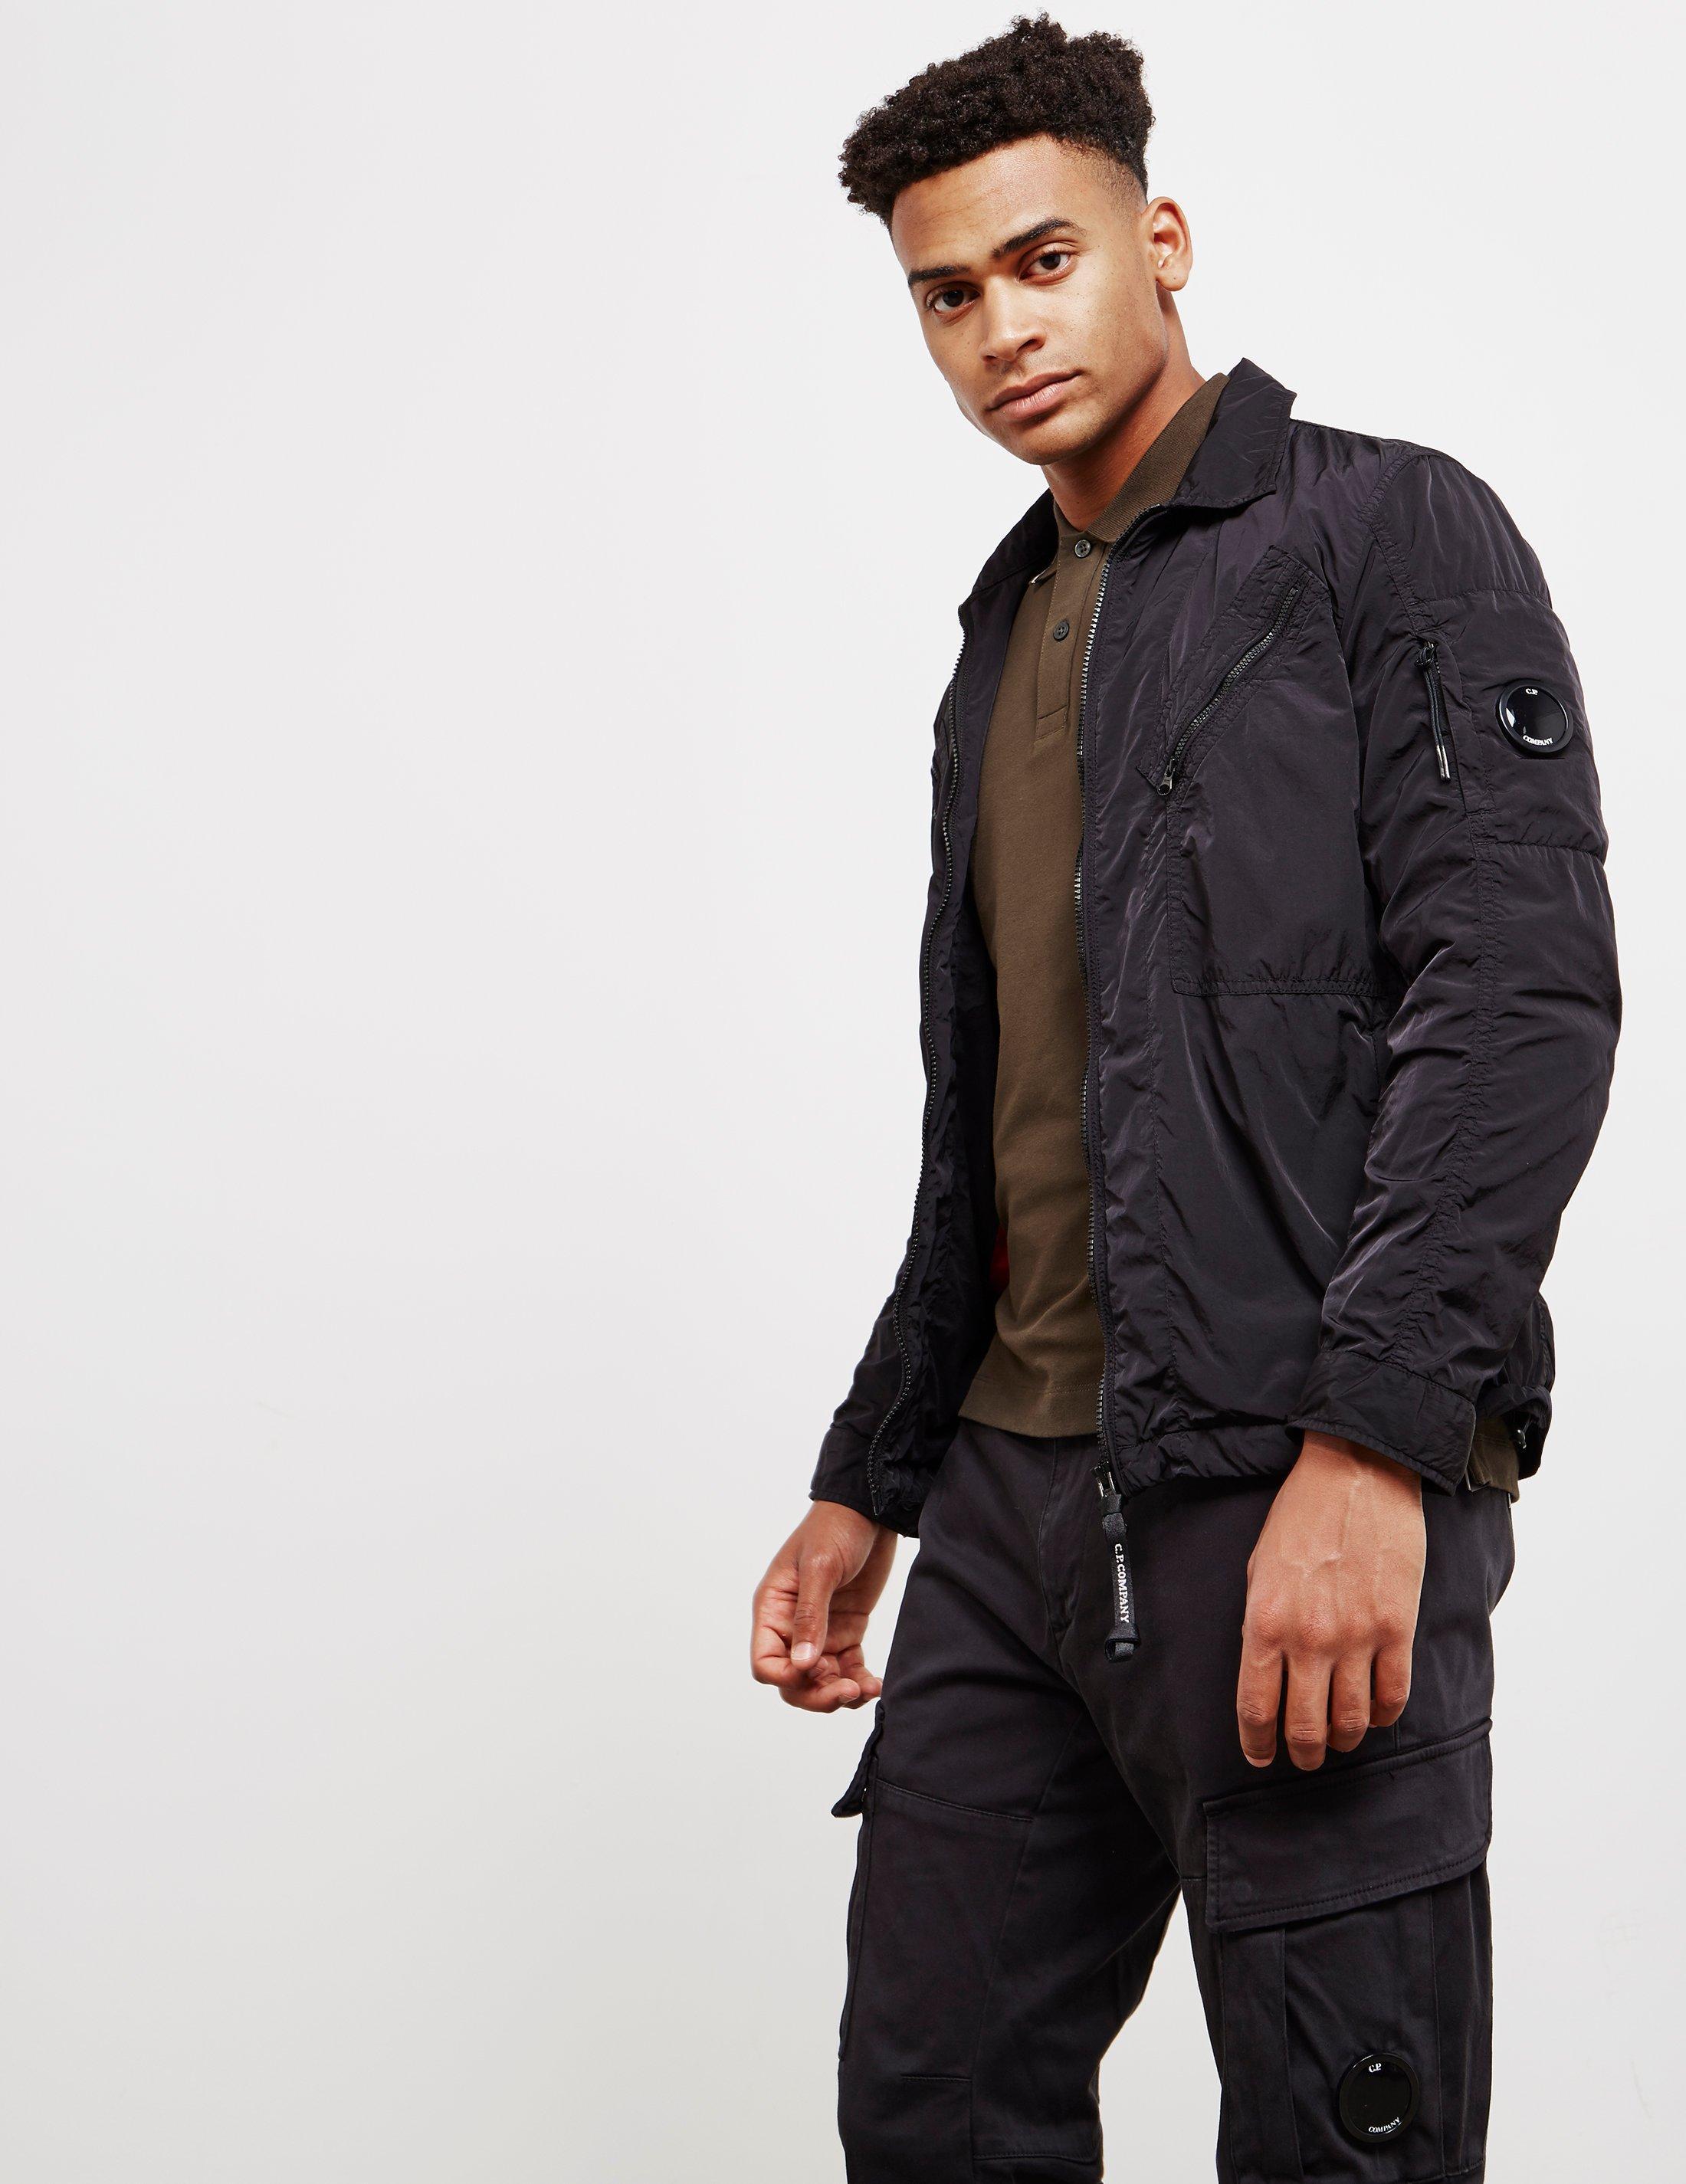 Cp Company Black Overshirt, Buy Now, on Sale, 54% OFF, playgrowned.com